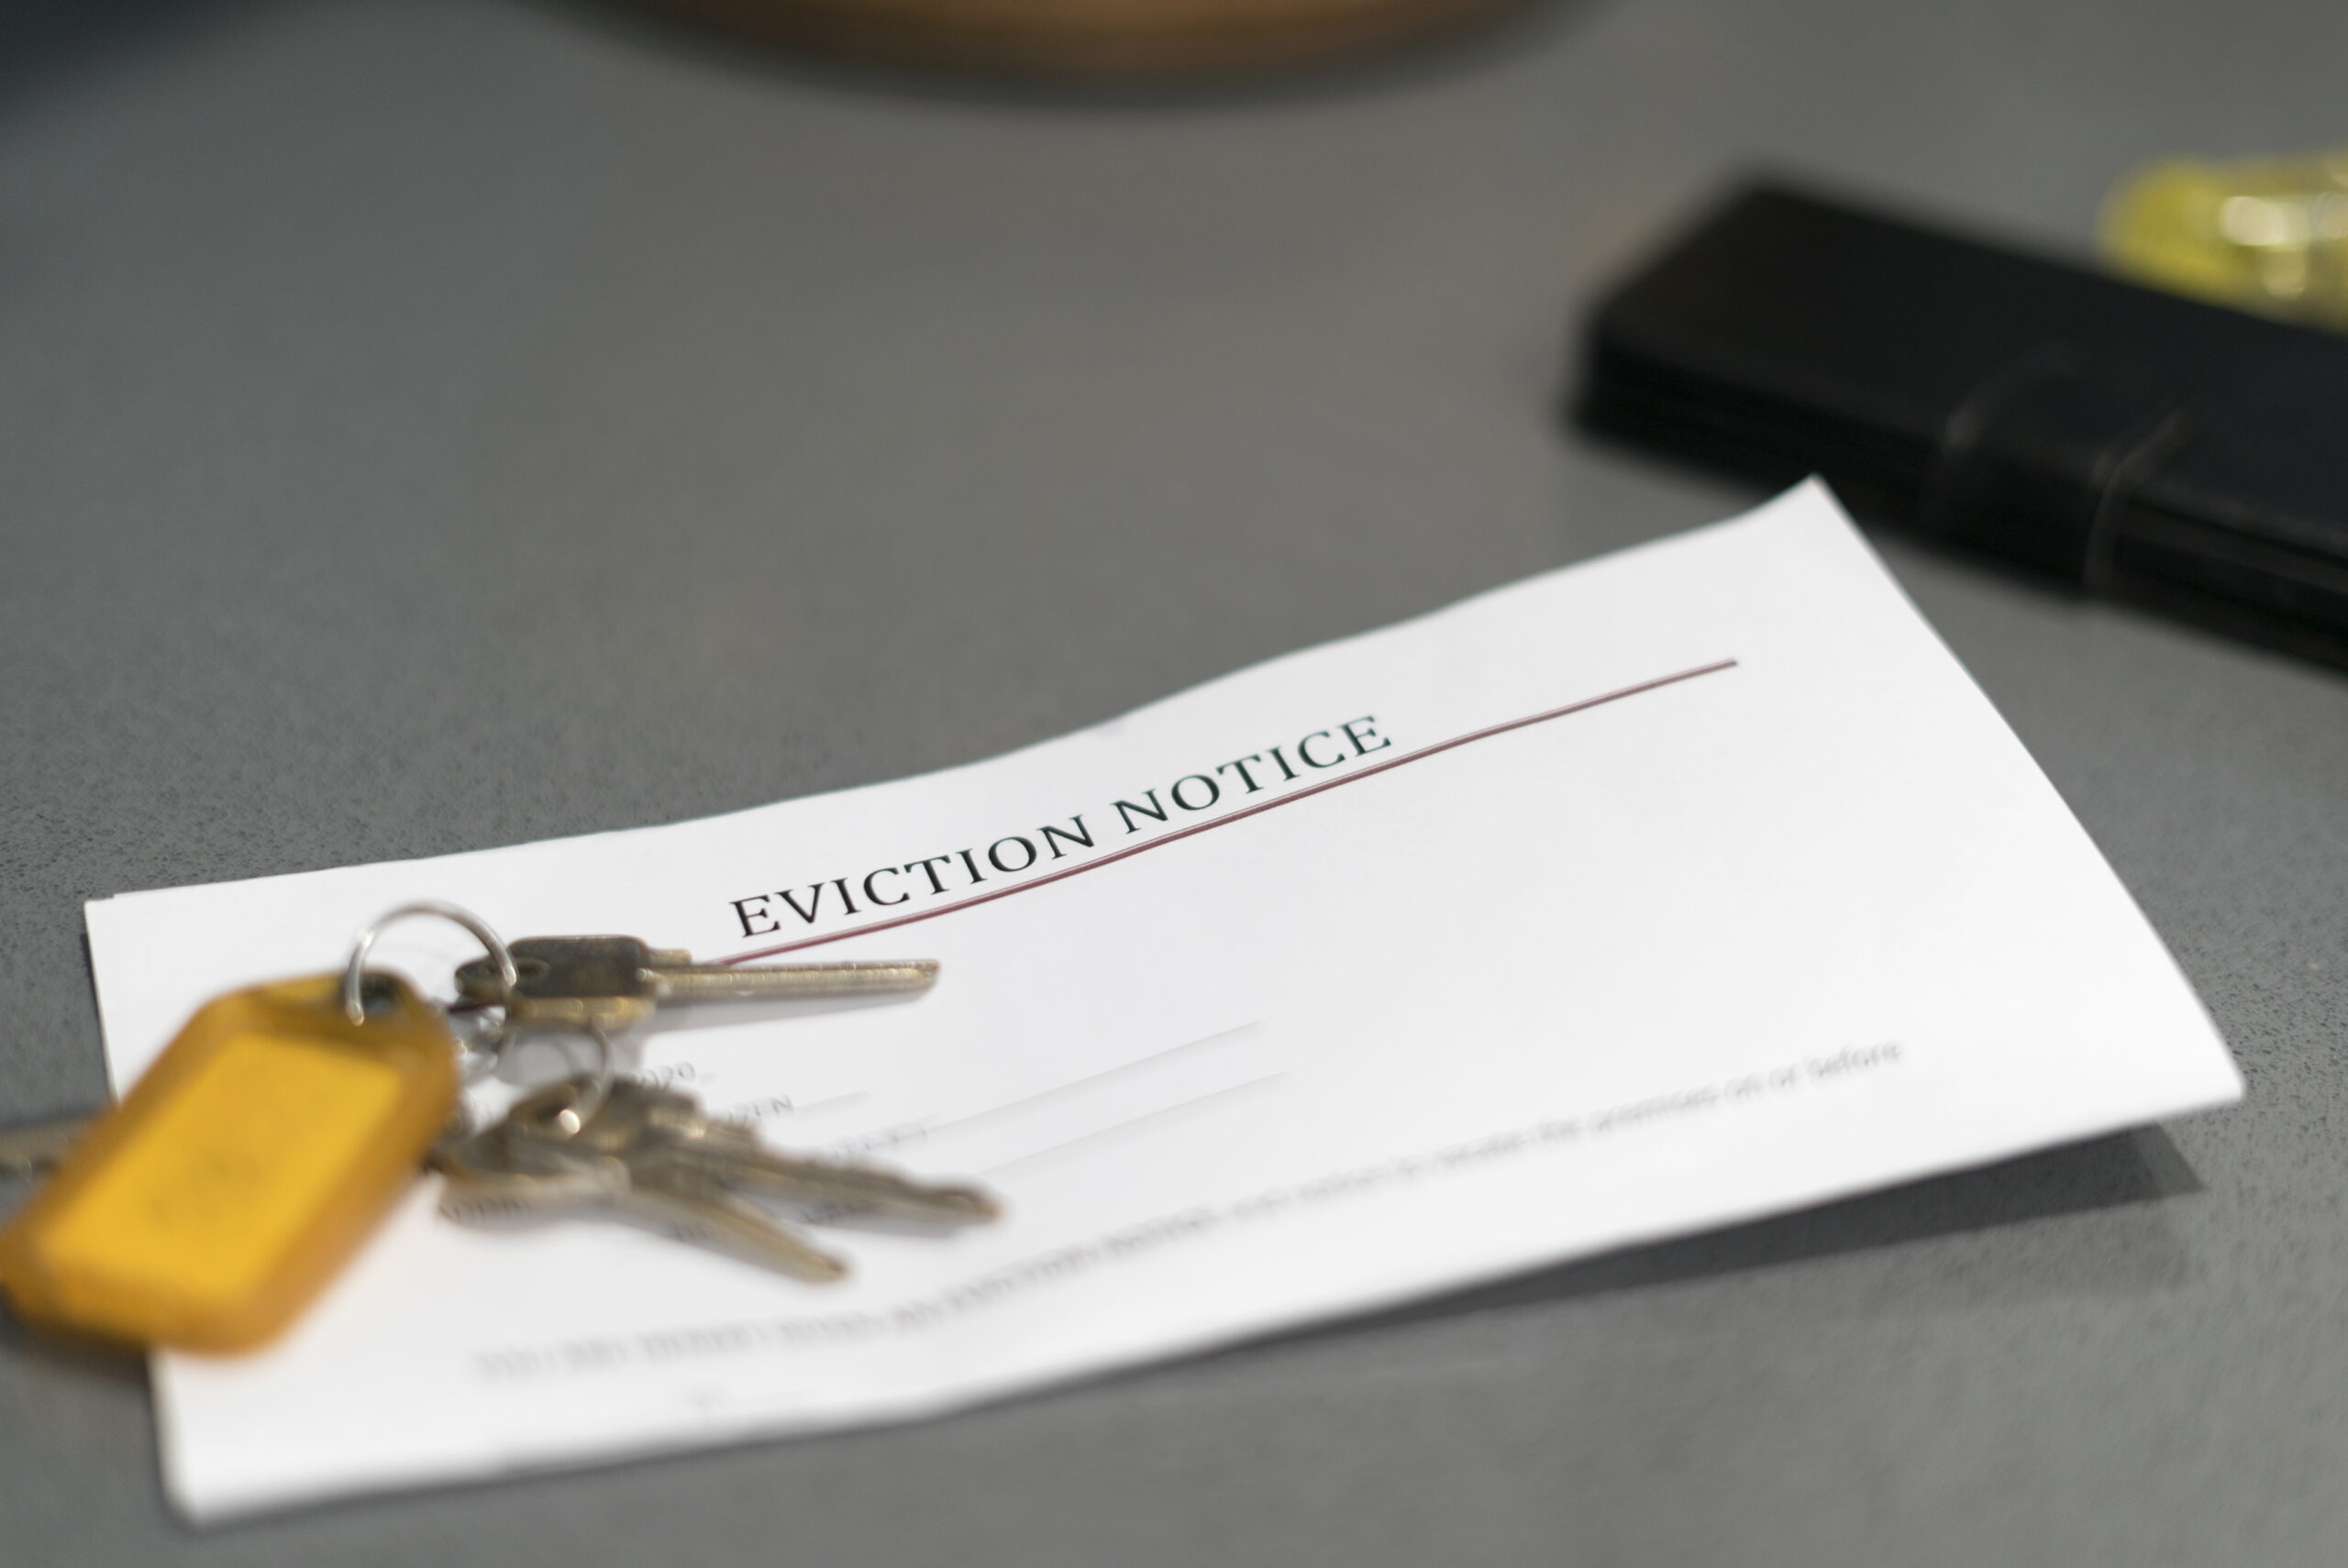 House keys sitting on an eviction notice received in the mail.